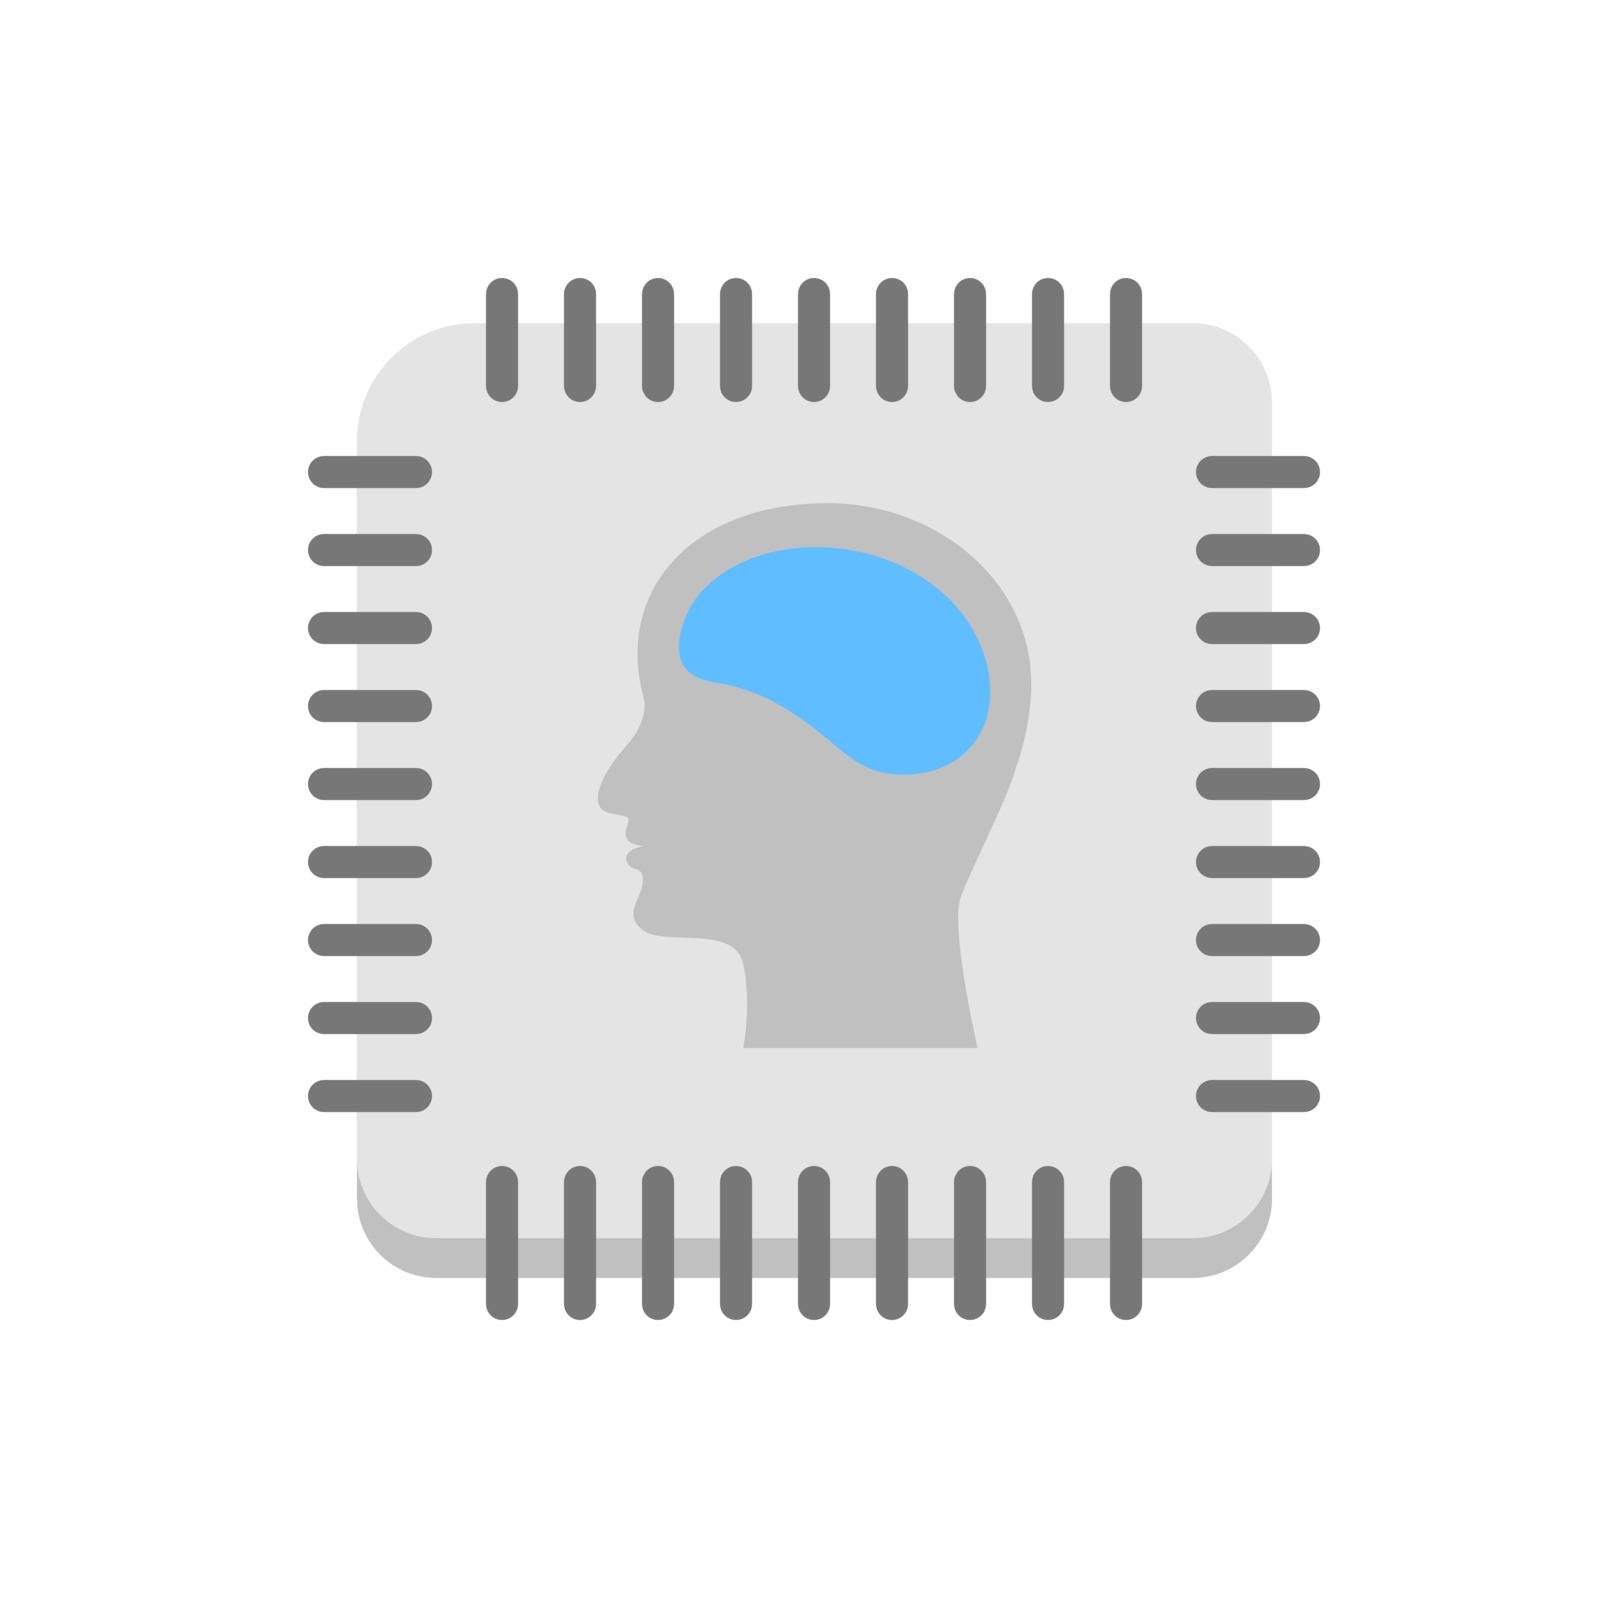 Artificial intelligence icon. Vector illustration of a computer chip with man portrait and brain.